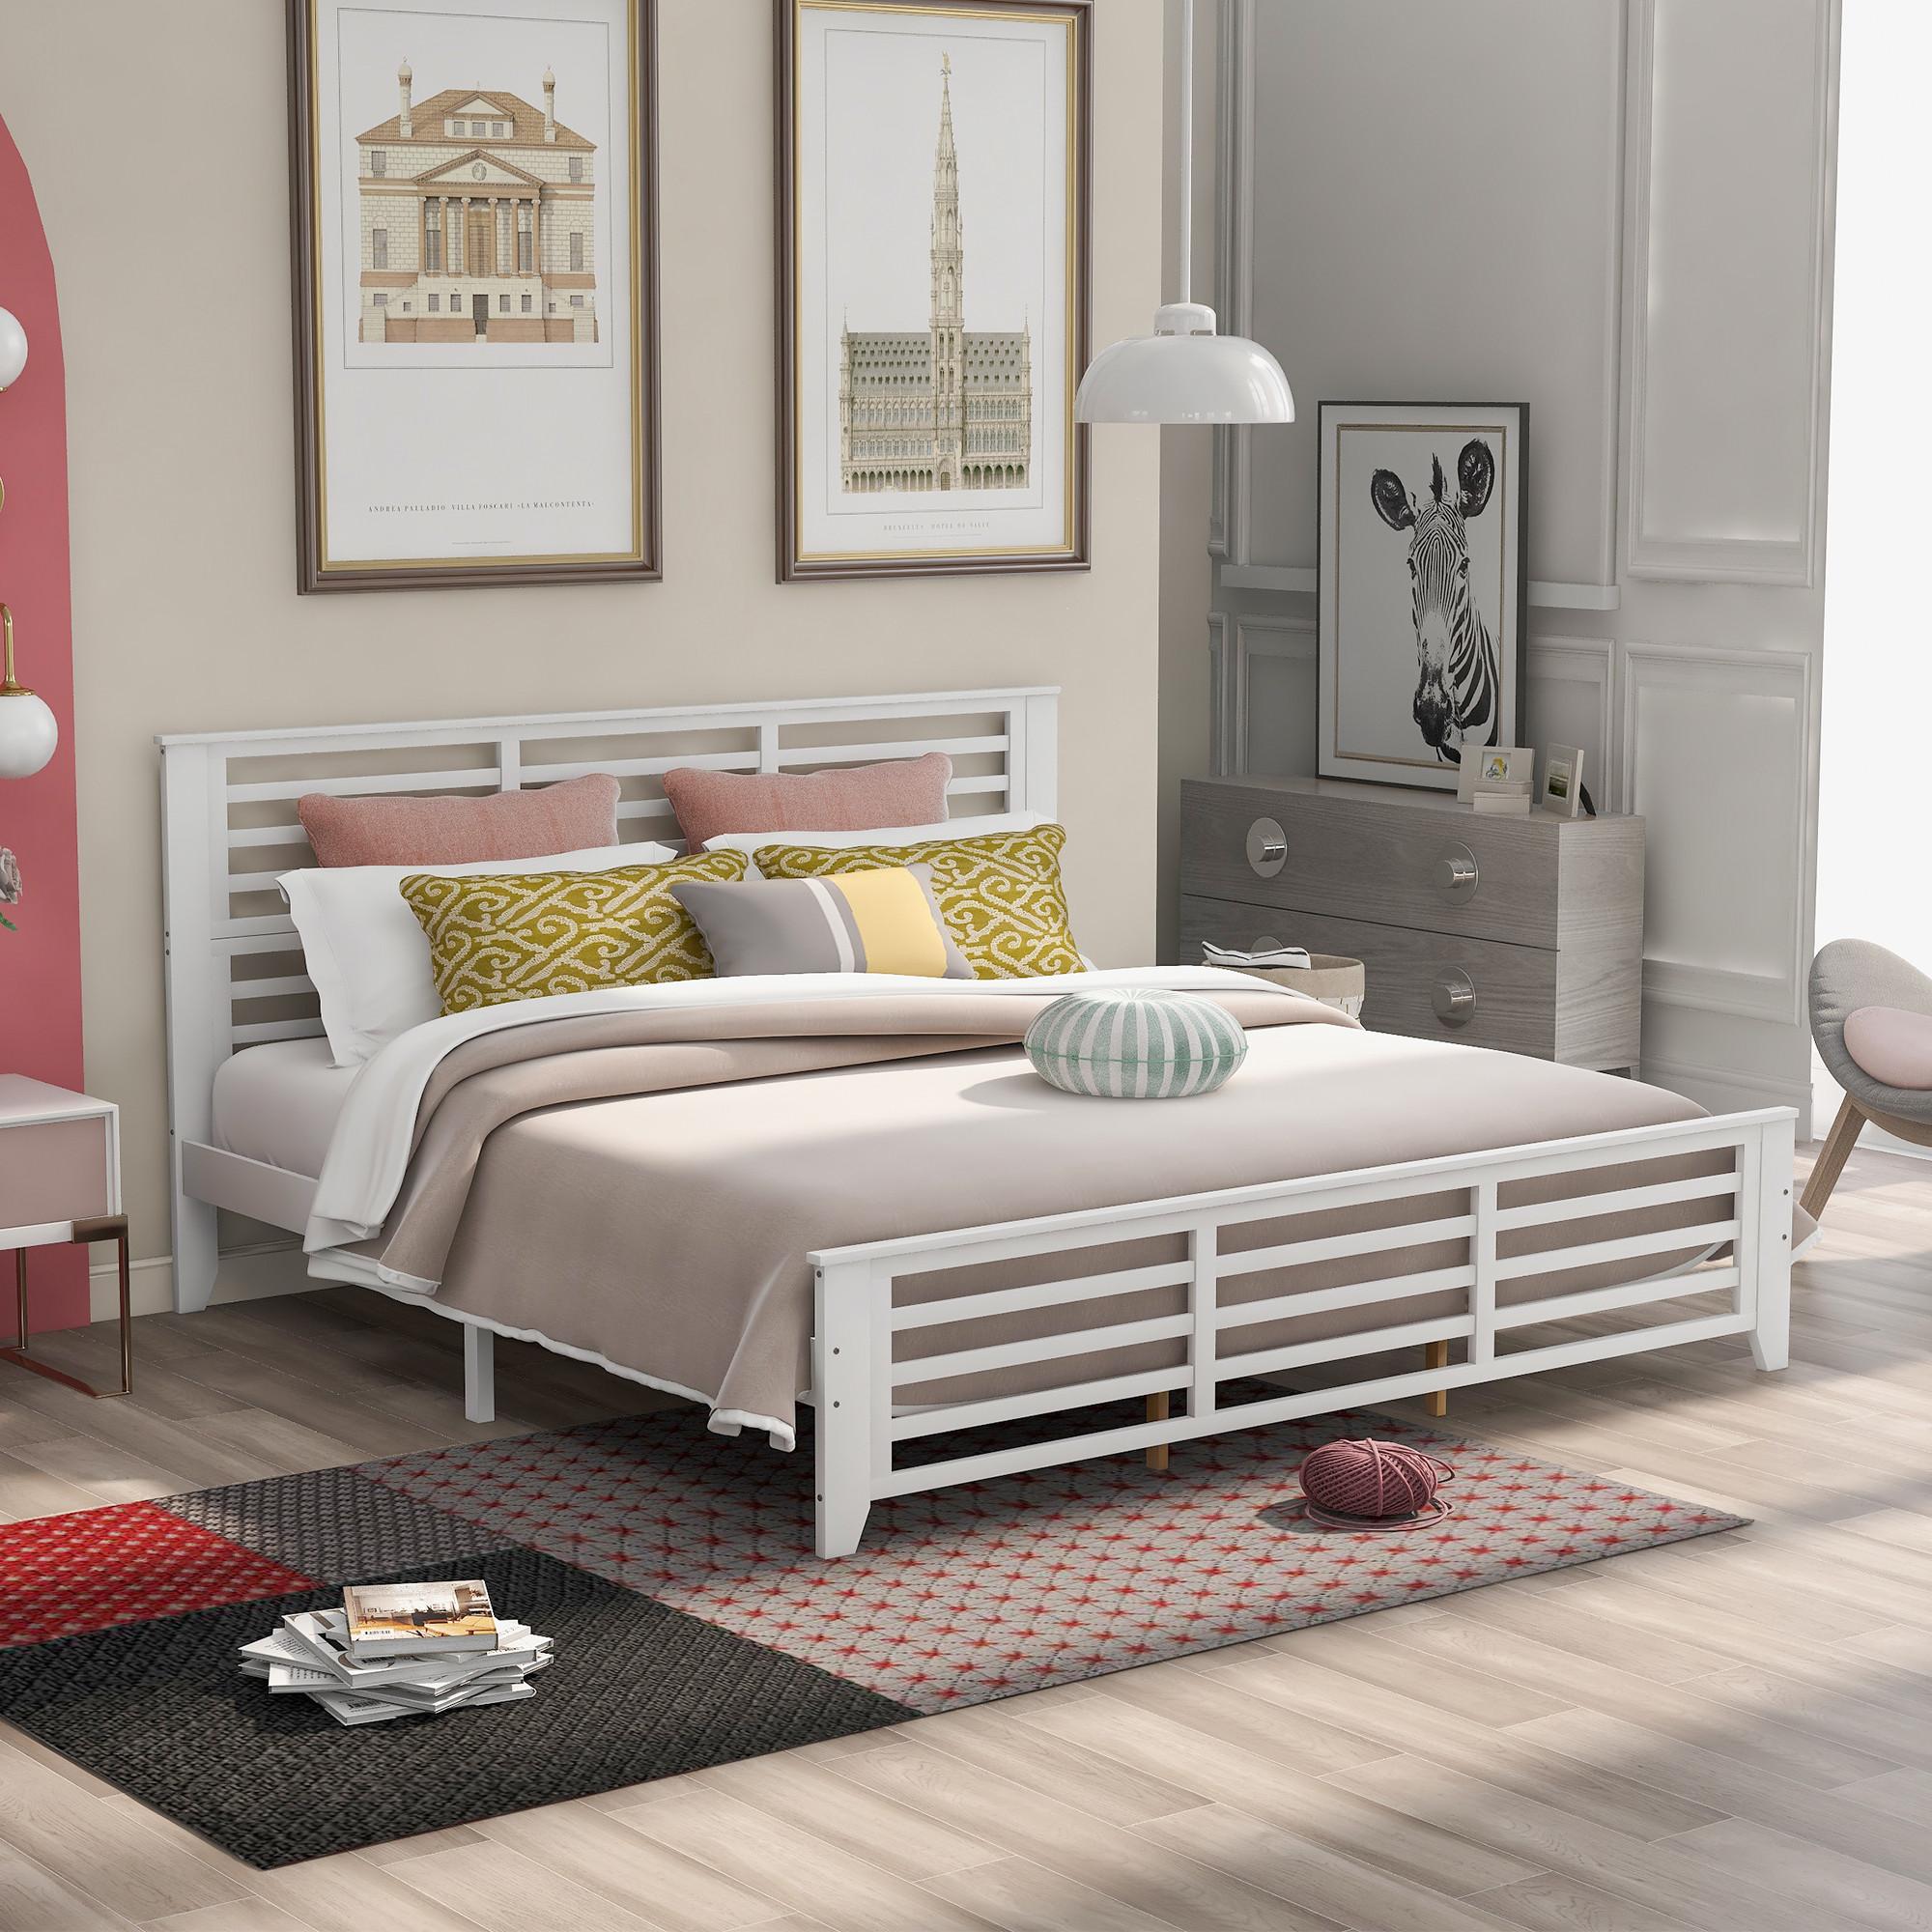 King Size Wood Platform Bed Frame with Headboard and Footboard, Solid Wood Foundation with Slat Support, White 79.9x80.7x41.3inch - image 2 of 7